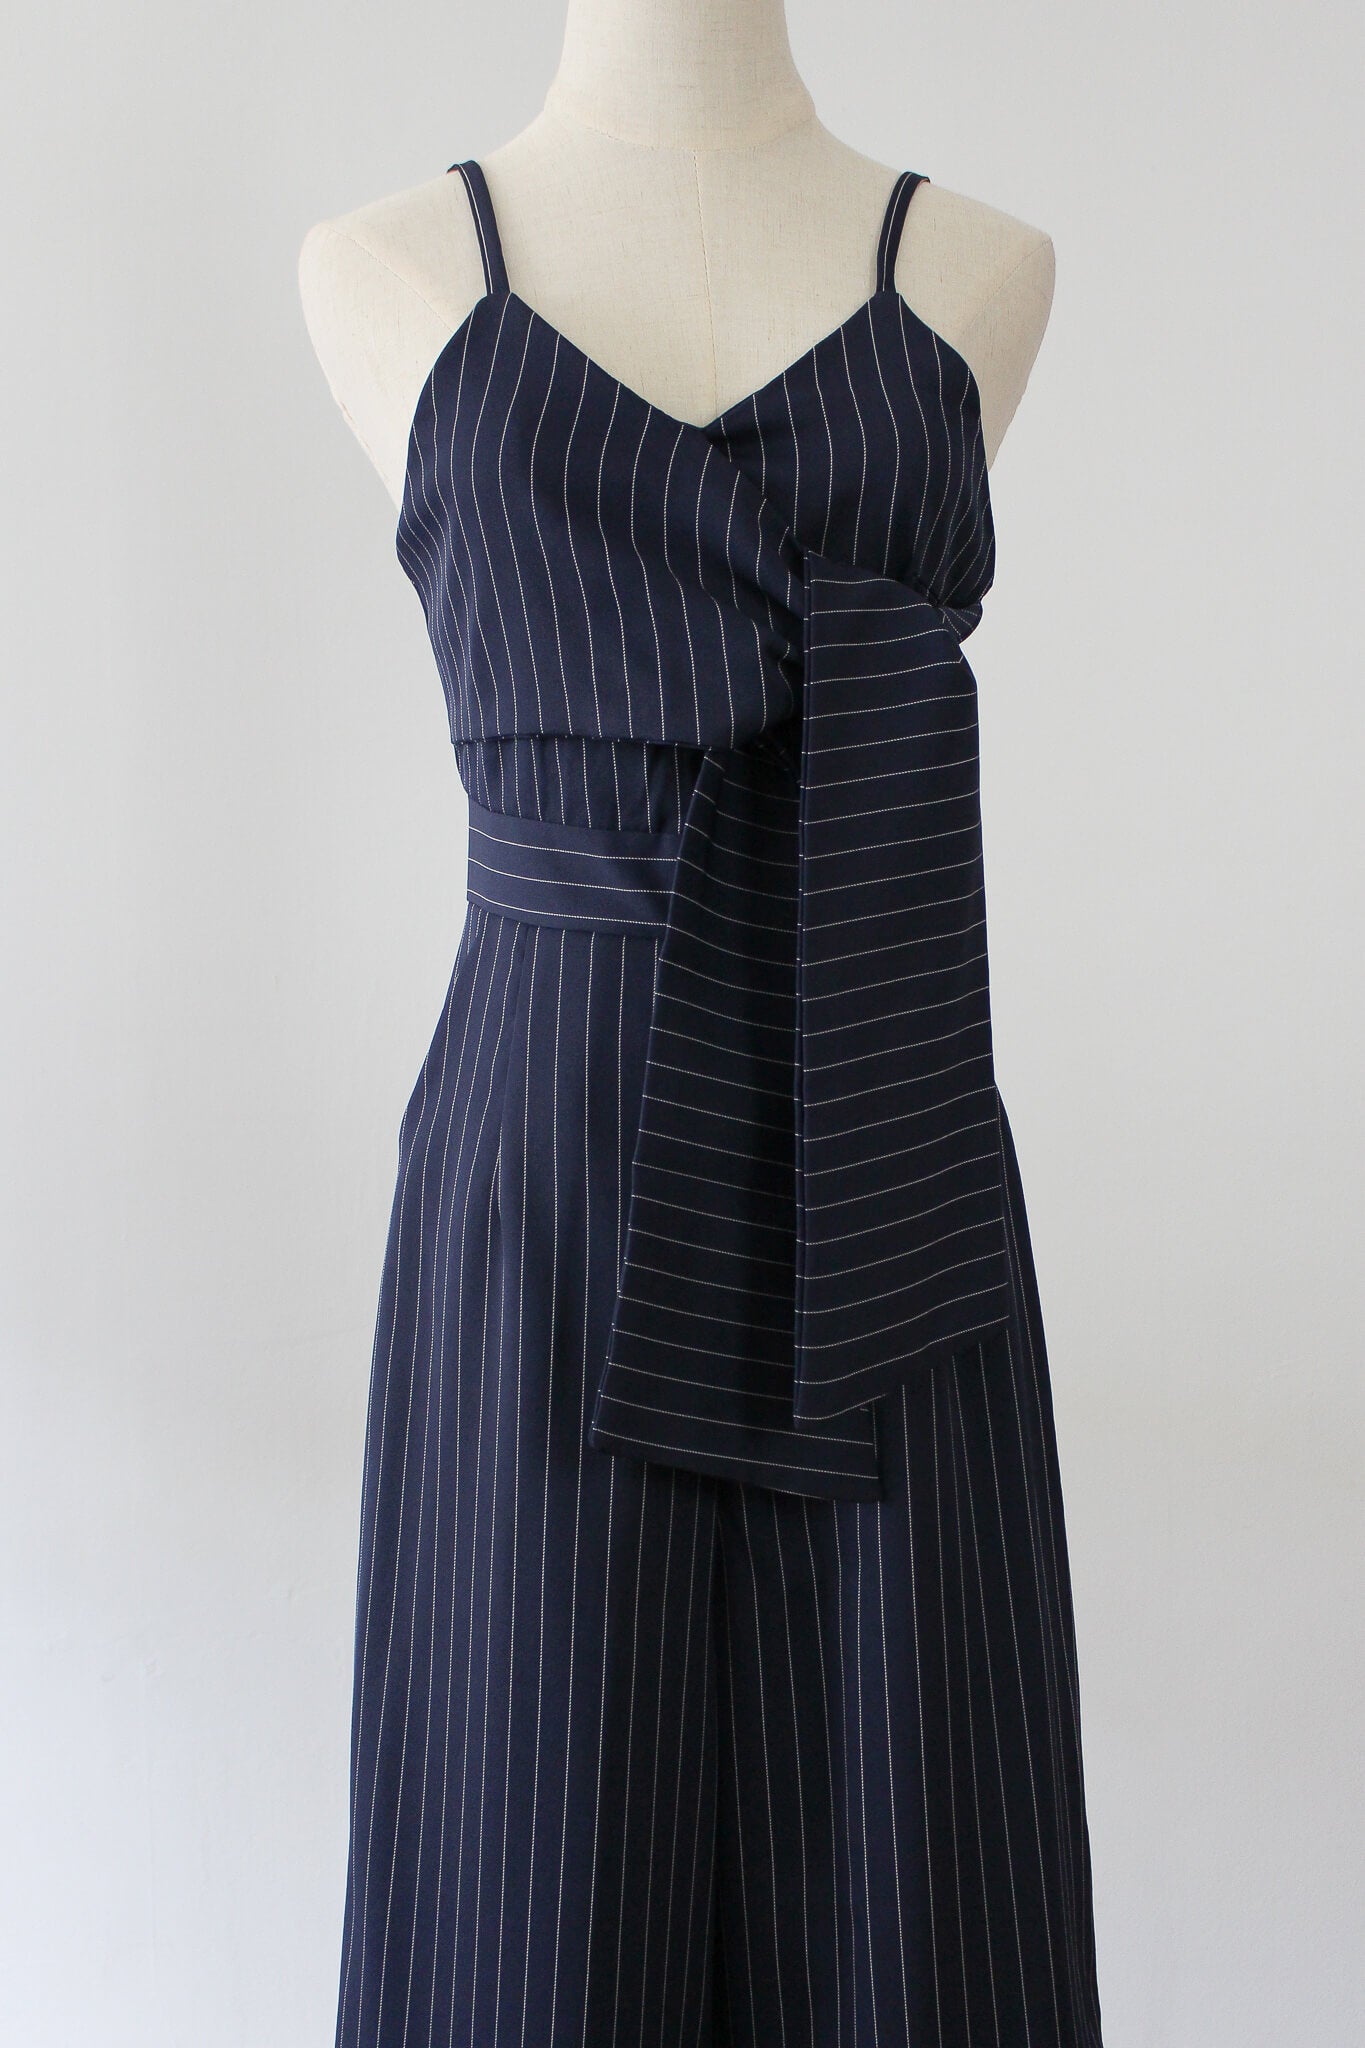 Striped jumpsuit with front twist. Perfect workwear or brunch outfit